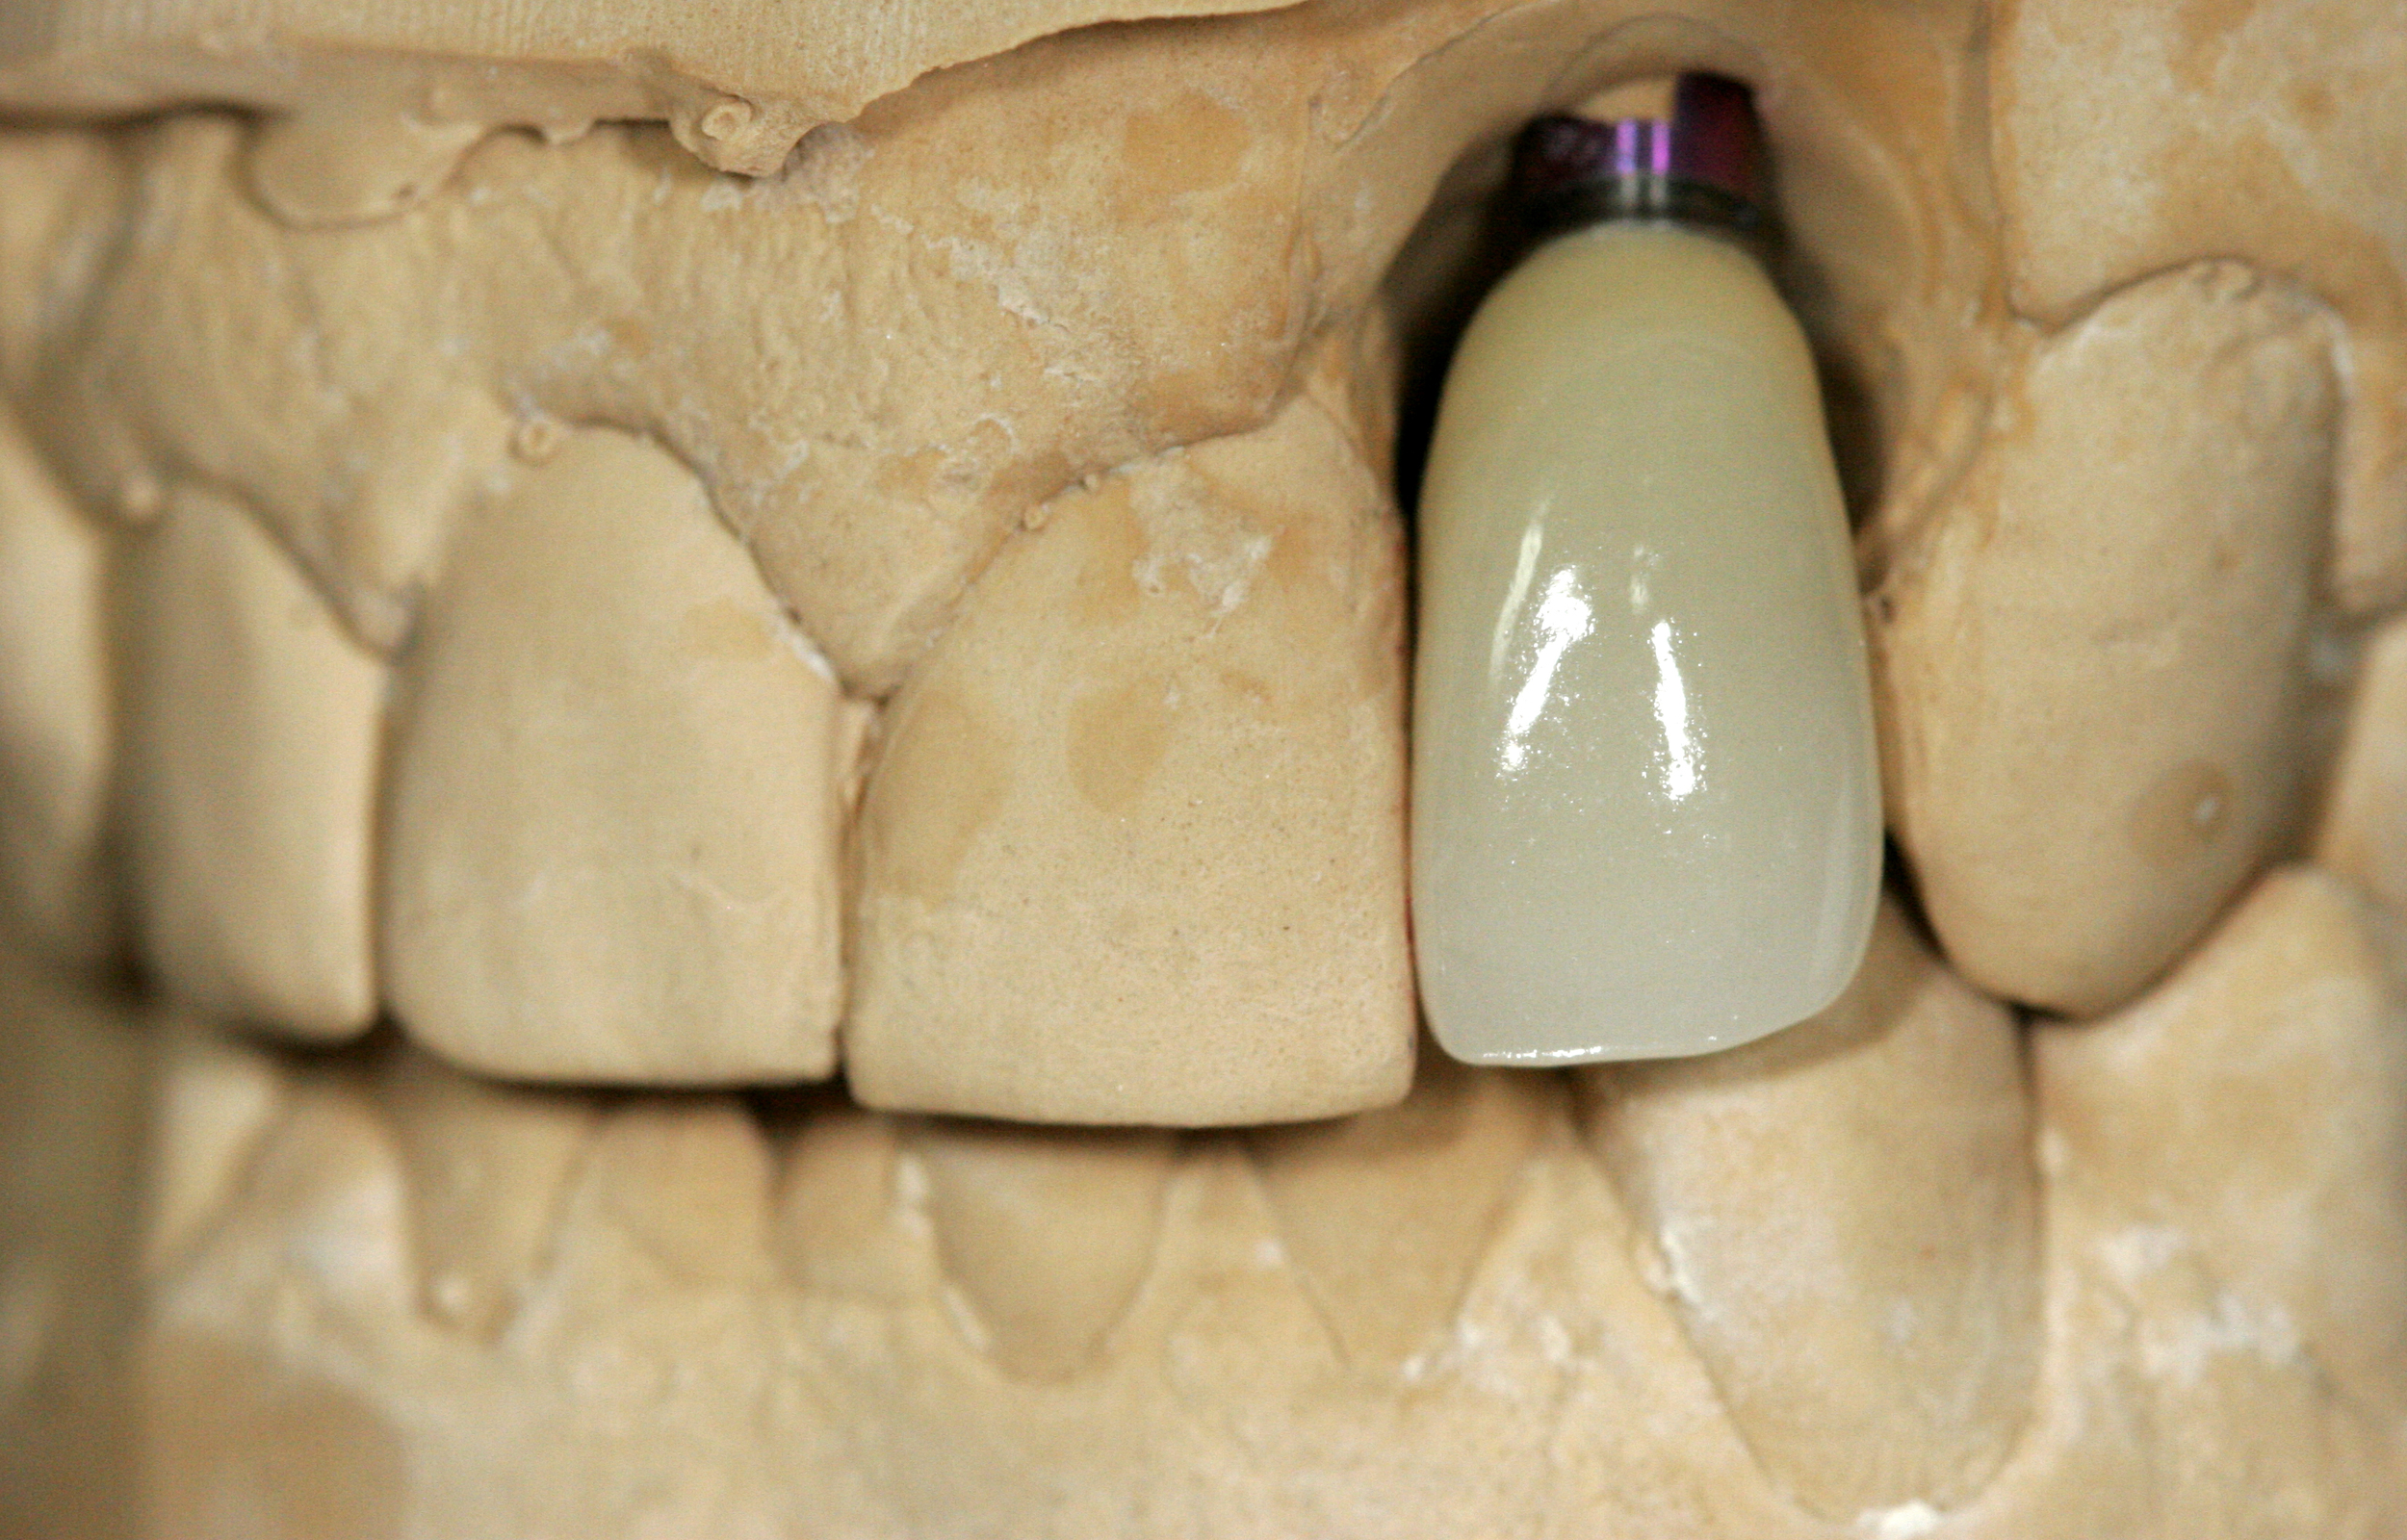 Finished SMT Layered Zirconia implant crown on model